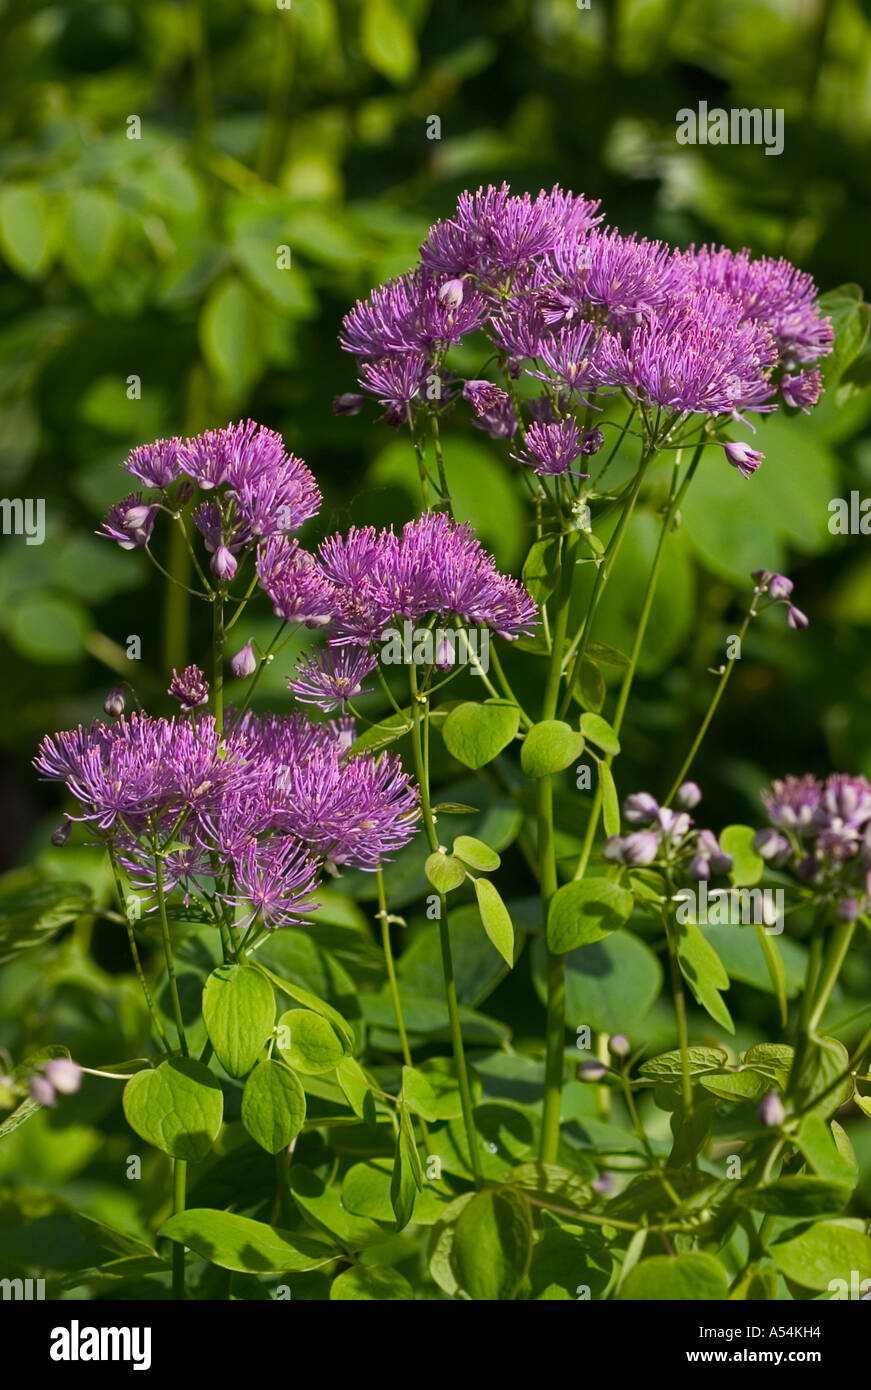 A natural shot of meadow rue. Stock Photo